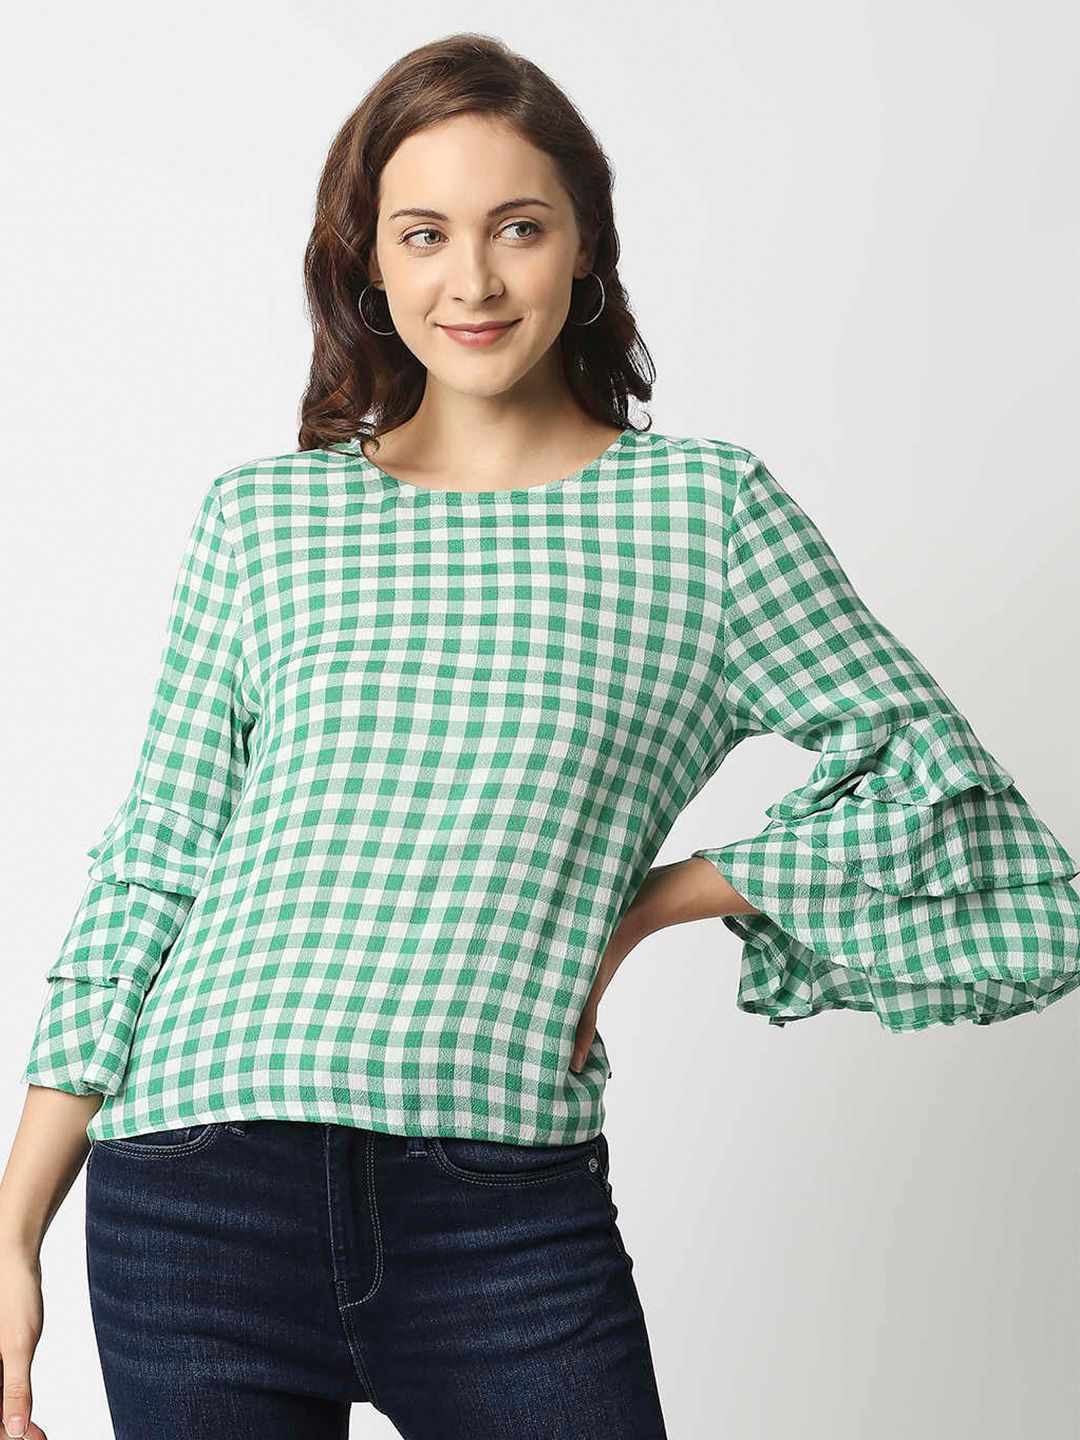 Pepe Jeans women Green Checked Top Price in India